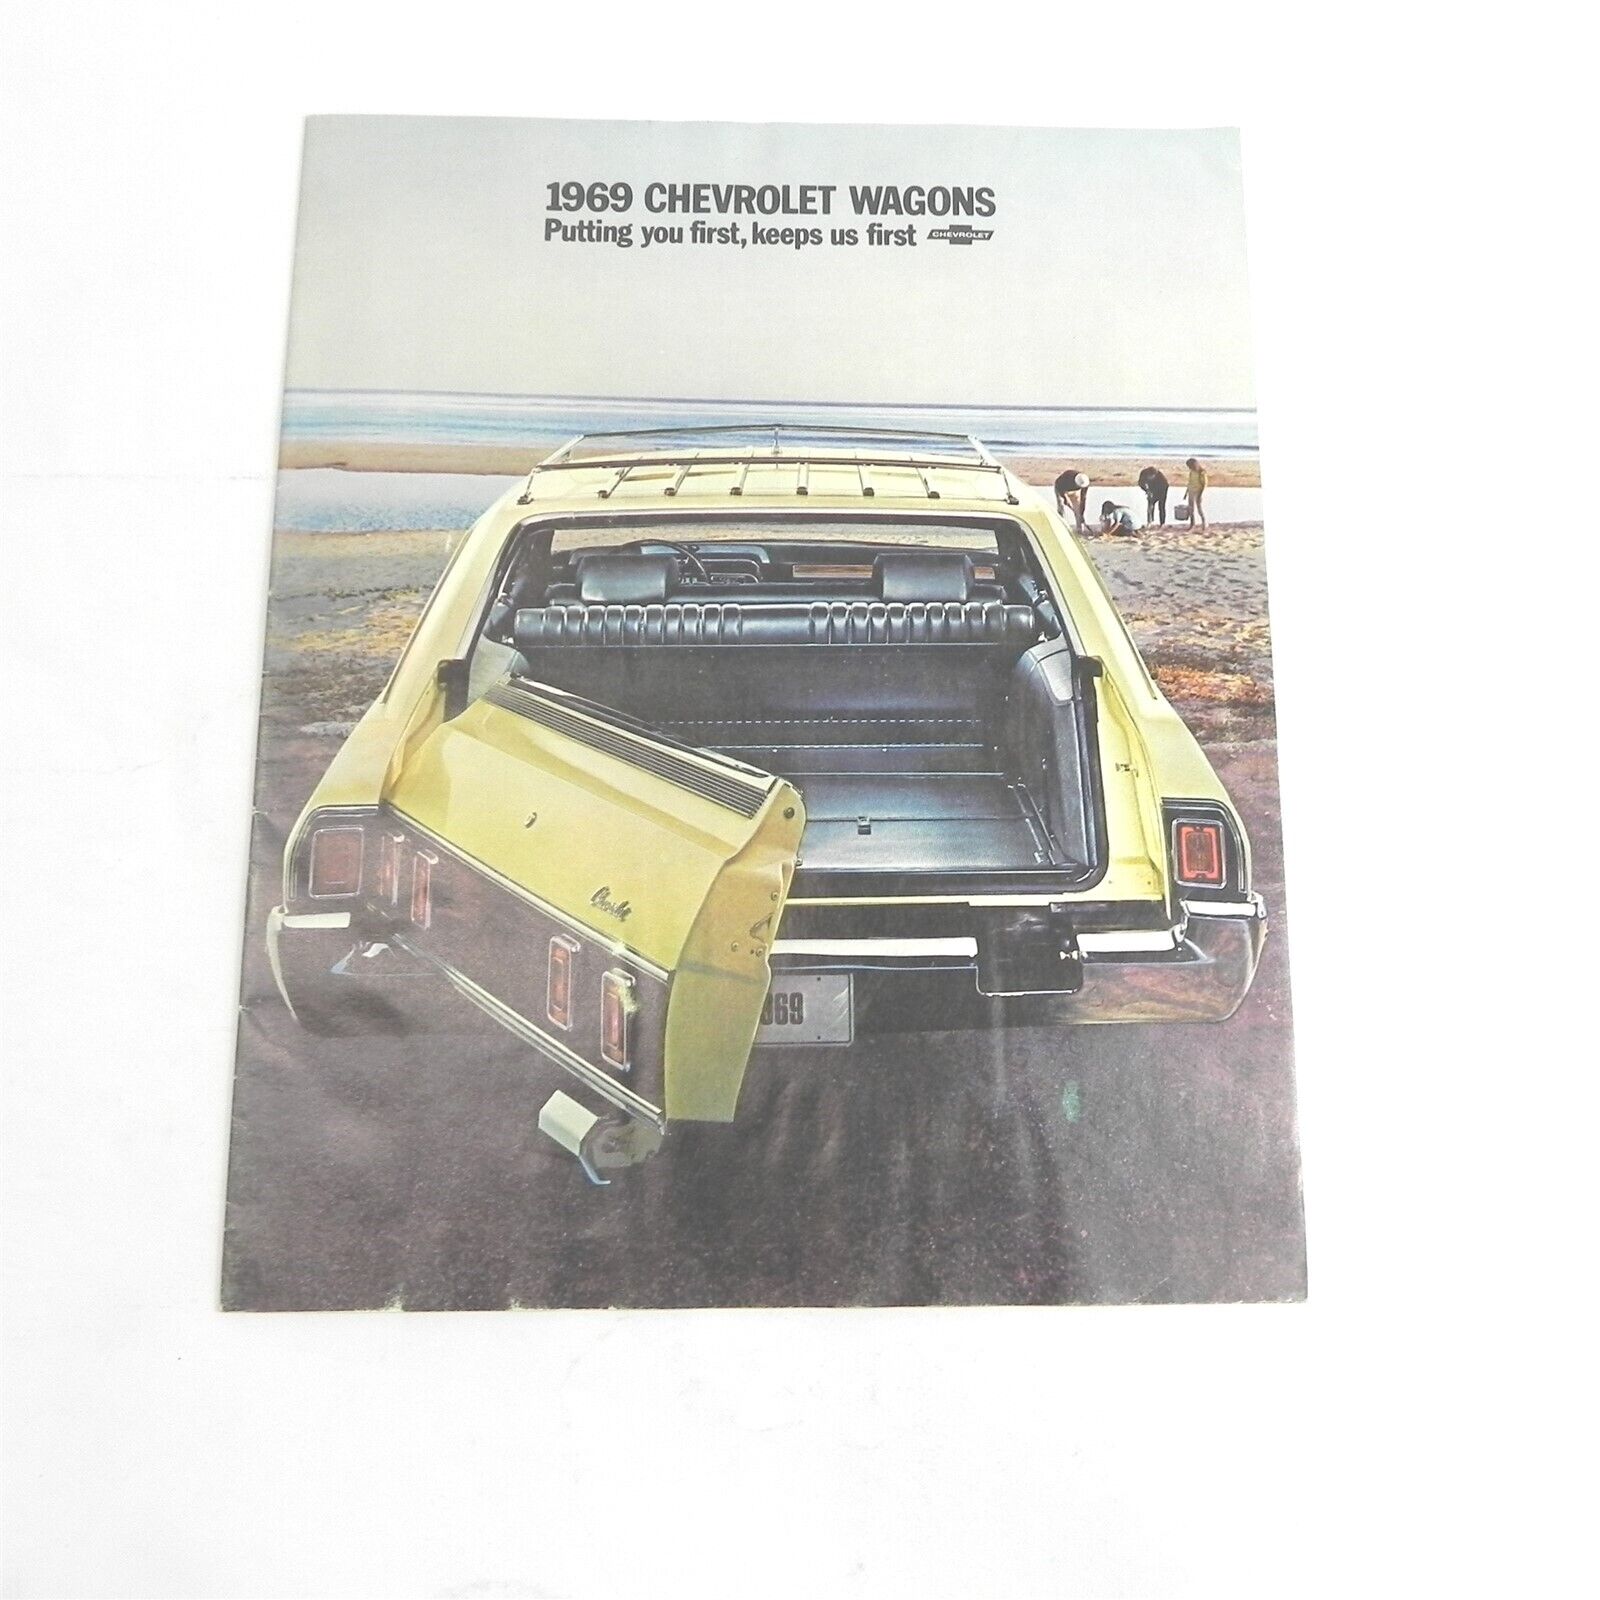 VINTAGE 1969 CHEVROLET CHEVY WAGONS DEALERSHIP SALES BROCHURE SPECIFICATIONS